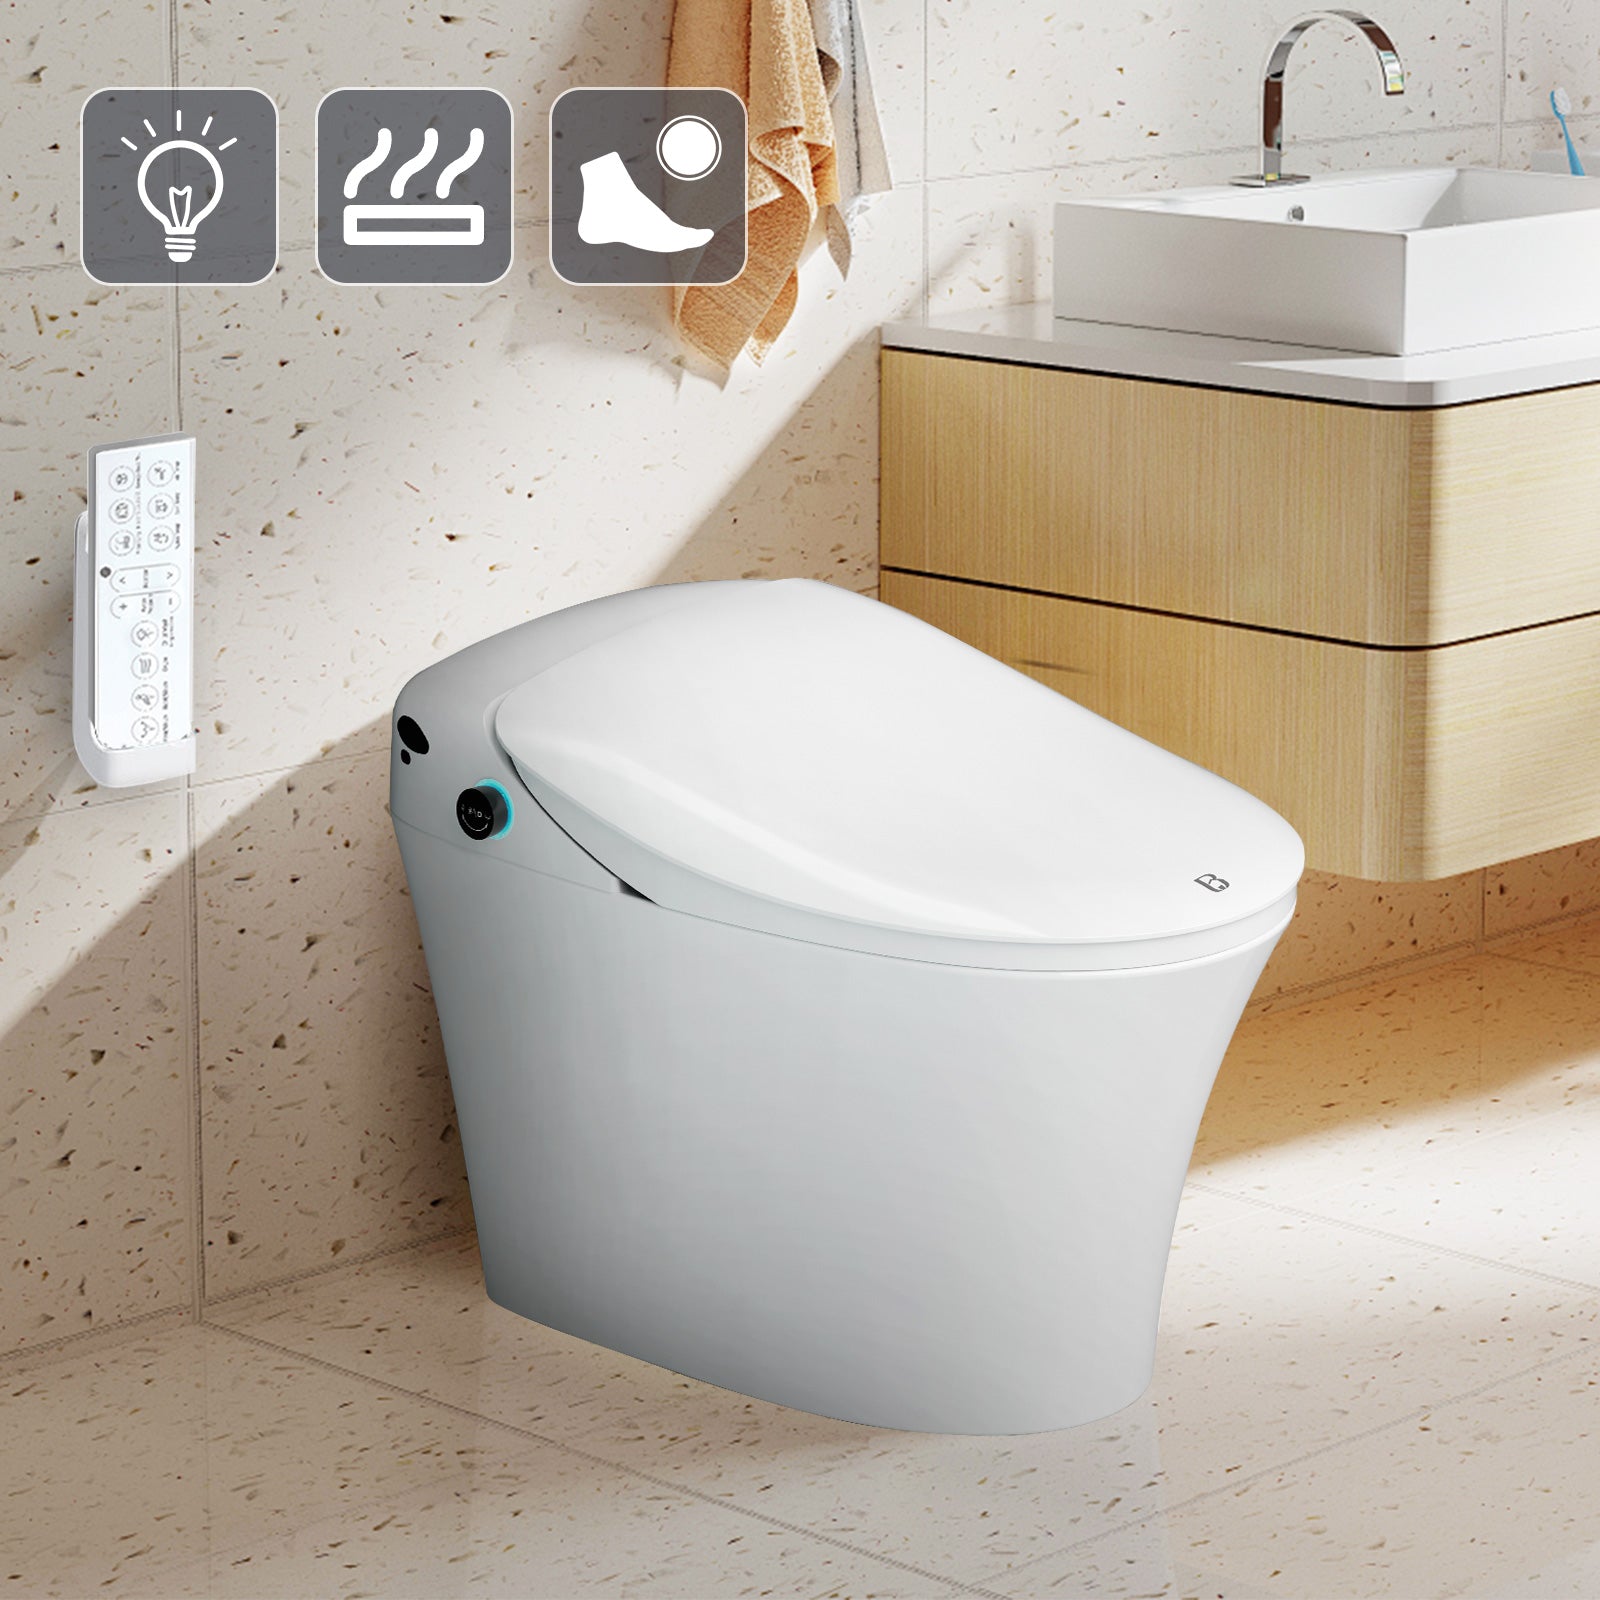 Electronic Smart Toilet Bidet with Heated Seat, Off-Seat Auto Flushing and Dryer, One Piece Bidet with Self-Cleaning Nozzle, LED Night Light